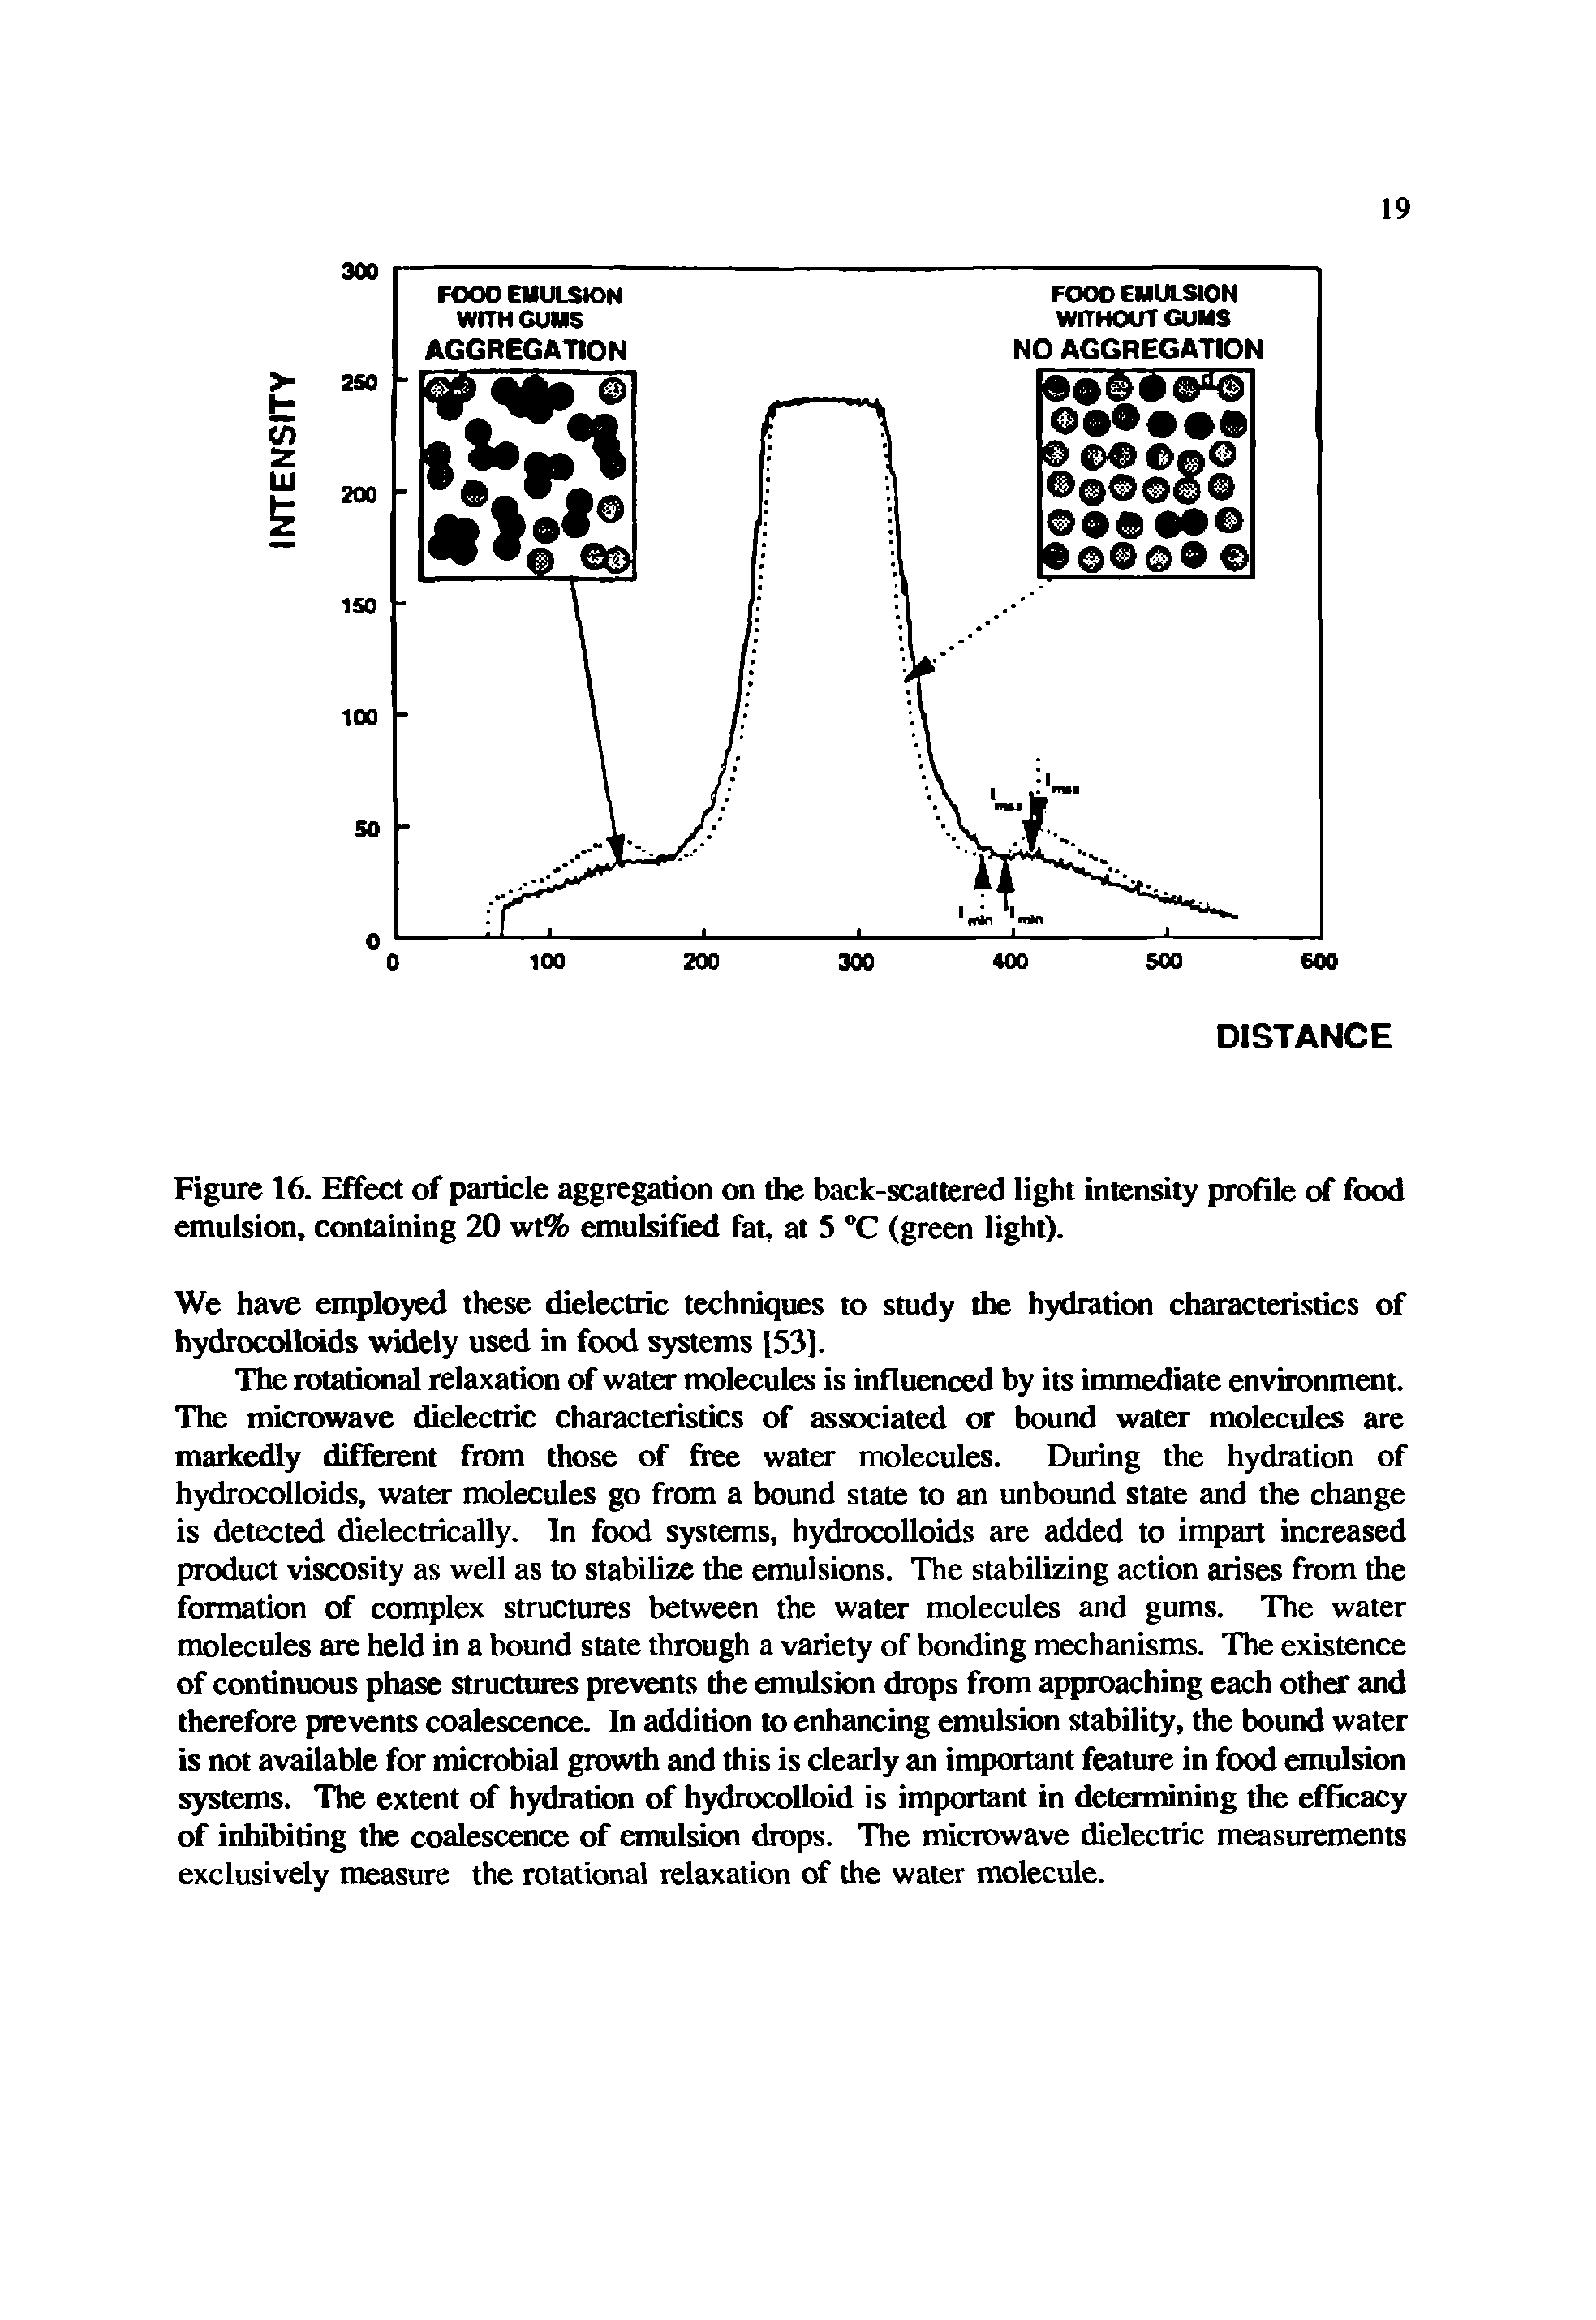 Figure 16. Effect of particle aggregation on the back-scattered light intensity profile of food emulsion, containing 20 wt% emulsified fat, at 5 °C (green light).